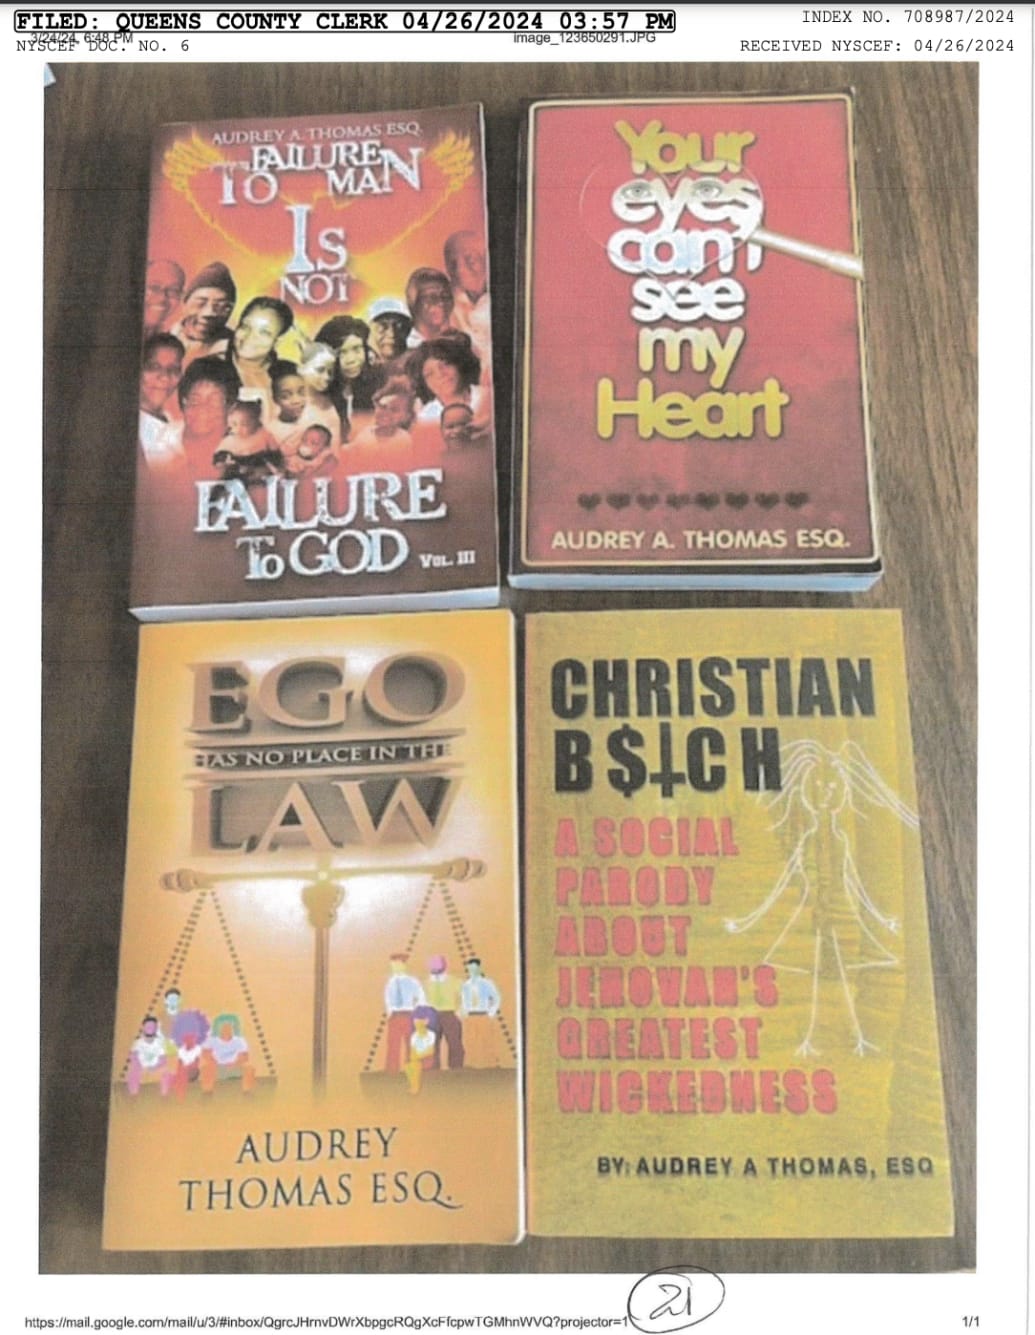 A photo of four books authored by Audrey Thomas.